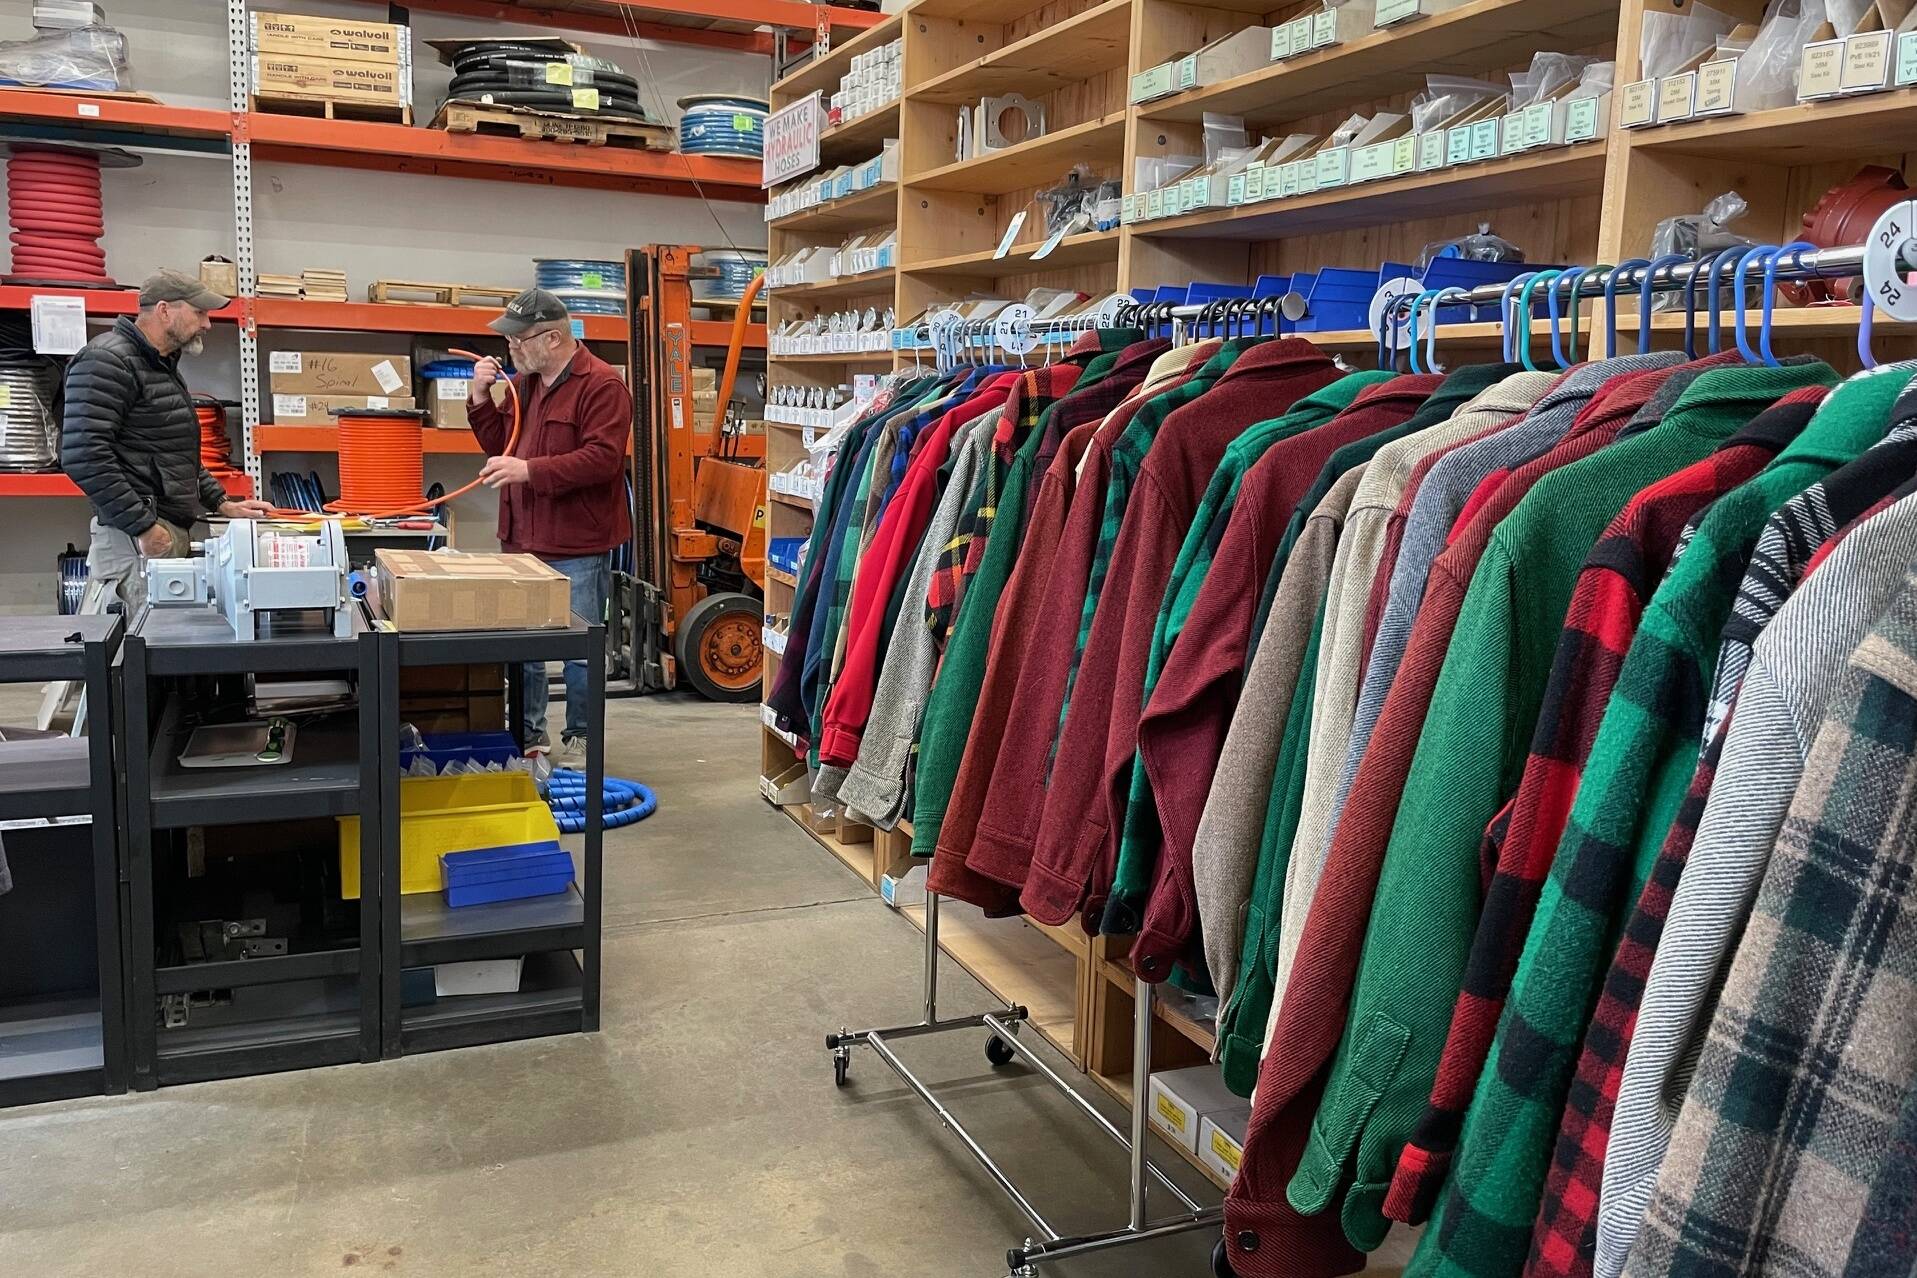 Tom Abbas discusses the hose his boat needs as shop owner and vintage halibut jacket provider Jim Geraghty shows his customer the options. Racks of dry-cleaned woolen jackets hang among the marine supply aisles in Gerahgty’s Lemon Creek business. (Laurie Craig / Juneau Empire)